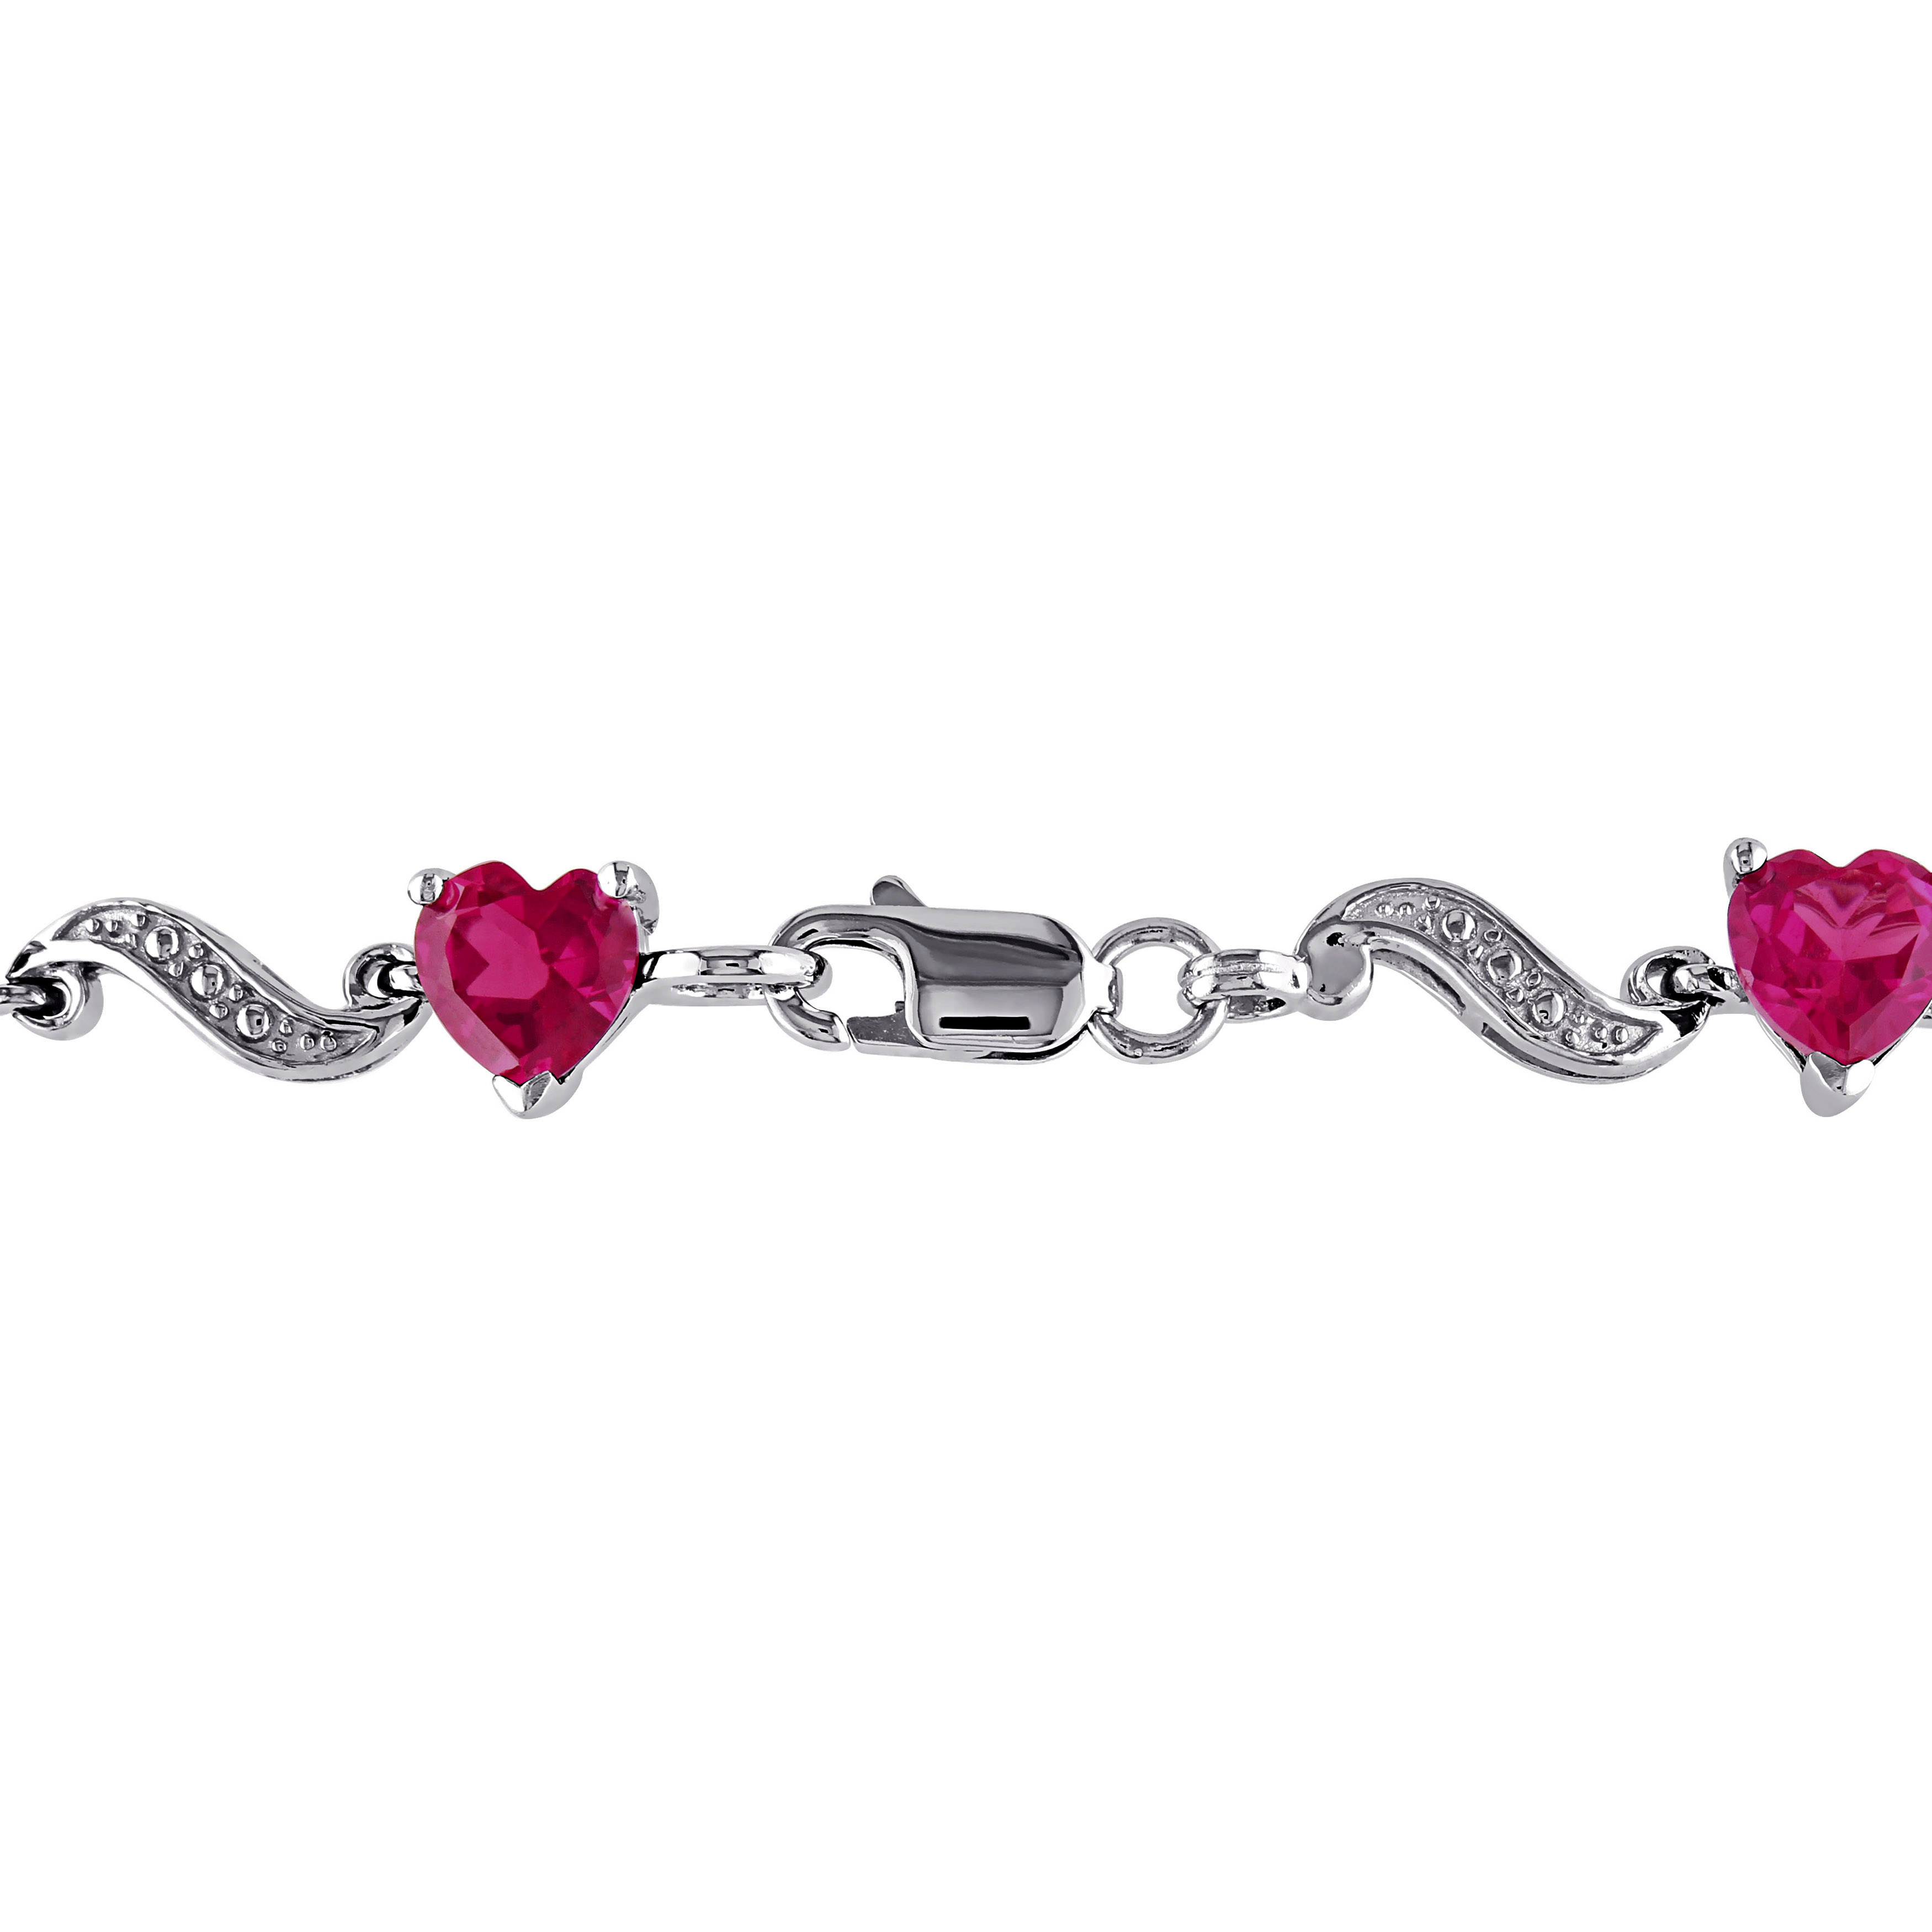 9 1/10 CT TGW Heart Shaped Created Ruby and Diamond Bracelet in Sterling Silver - 7 in.